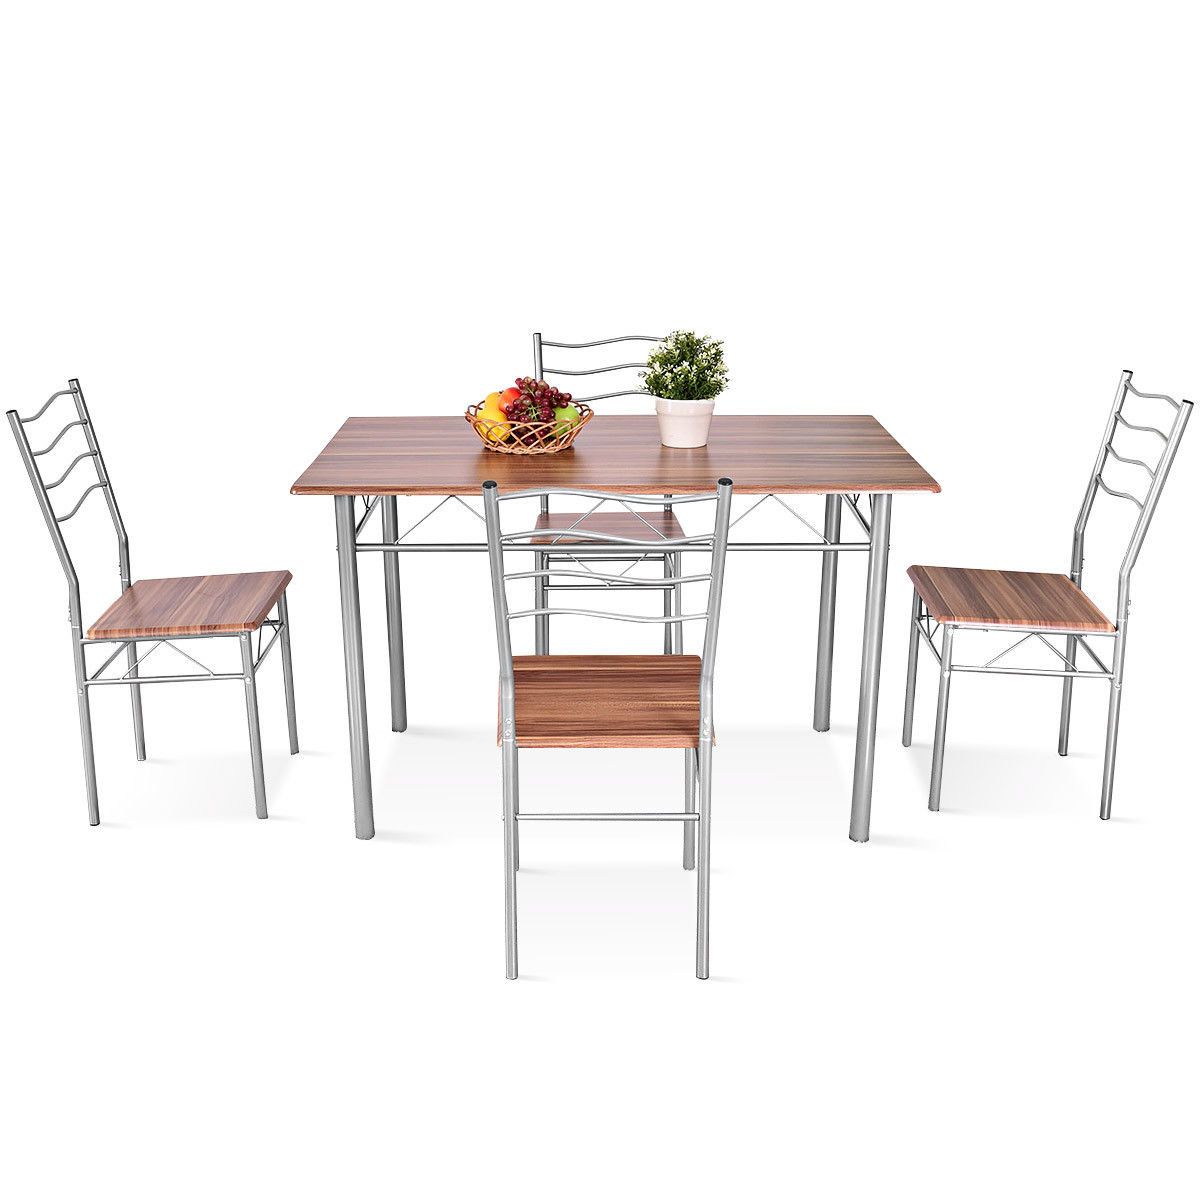 Most Popular Details About Winston Porter Miskell 5 Piece Dining Set Regarding Miskell 5 Piece Dining Sets (View 1 of 20)